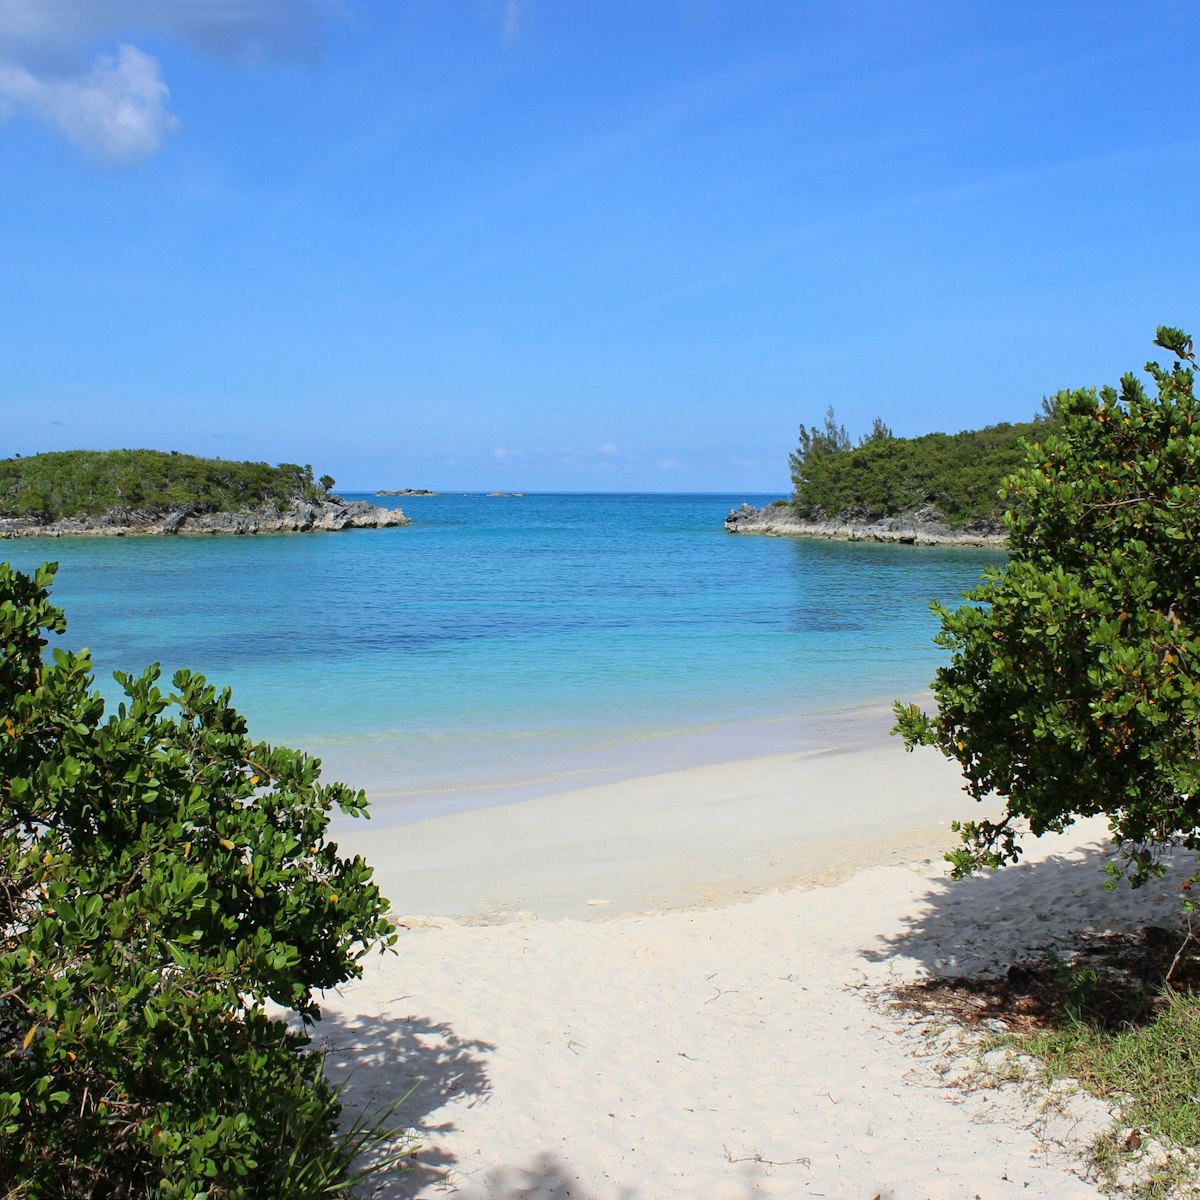 Pretty view of Turtle Bay Beach on the island of Bermuda in the Caribbean.  The photo shows the beautiful pink sand beach and calm blue green coloured water with islands out in front.  The beach is on Cooper's Island conservation area, near Clearwater Beach.